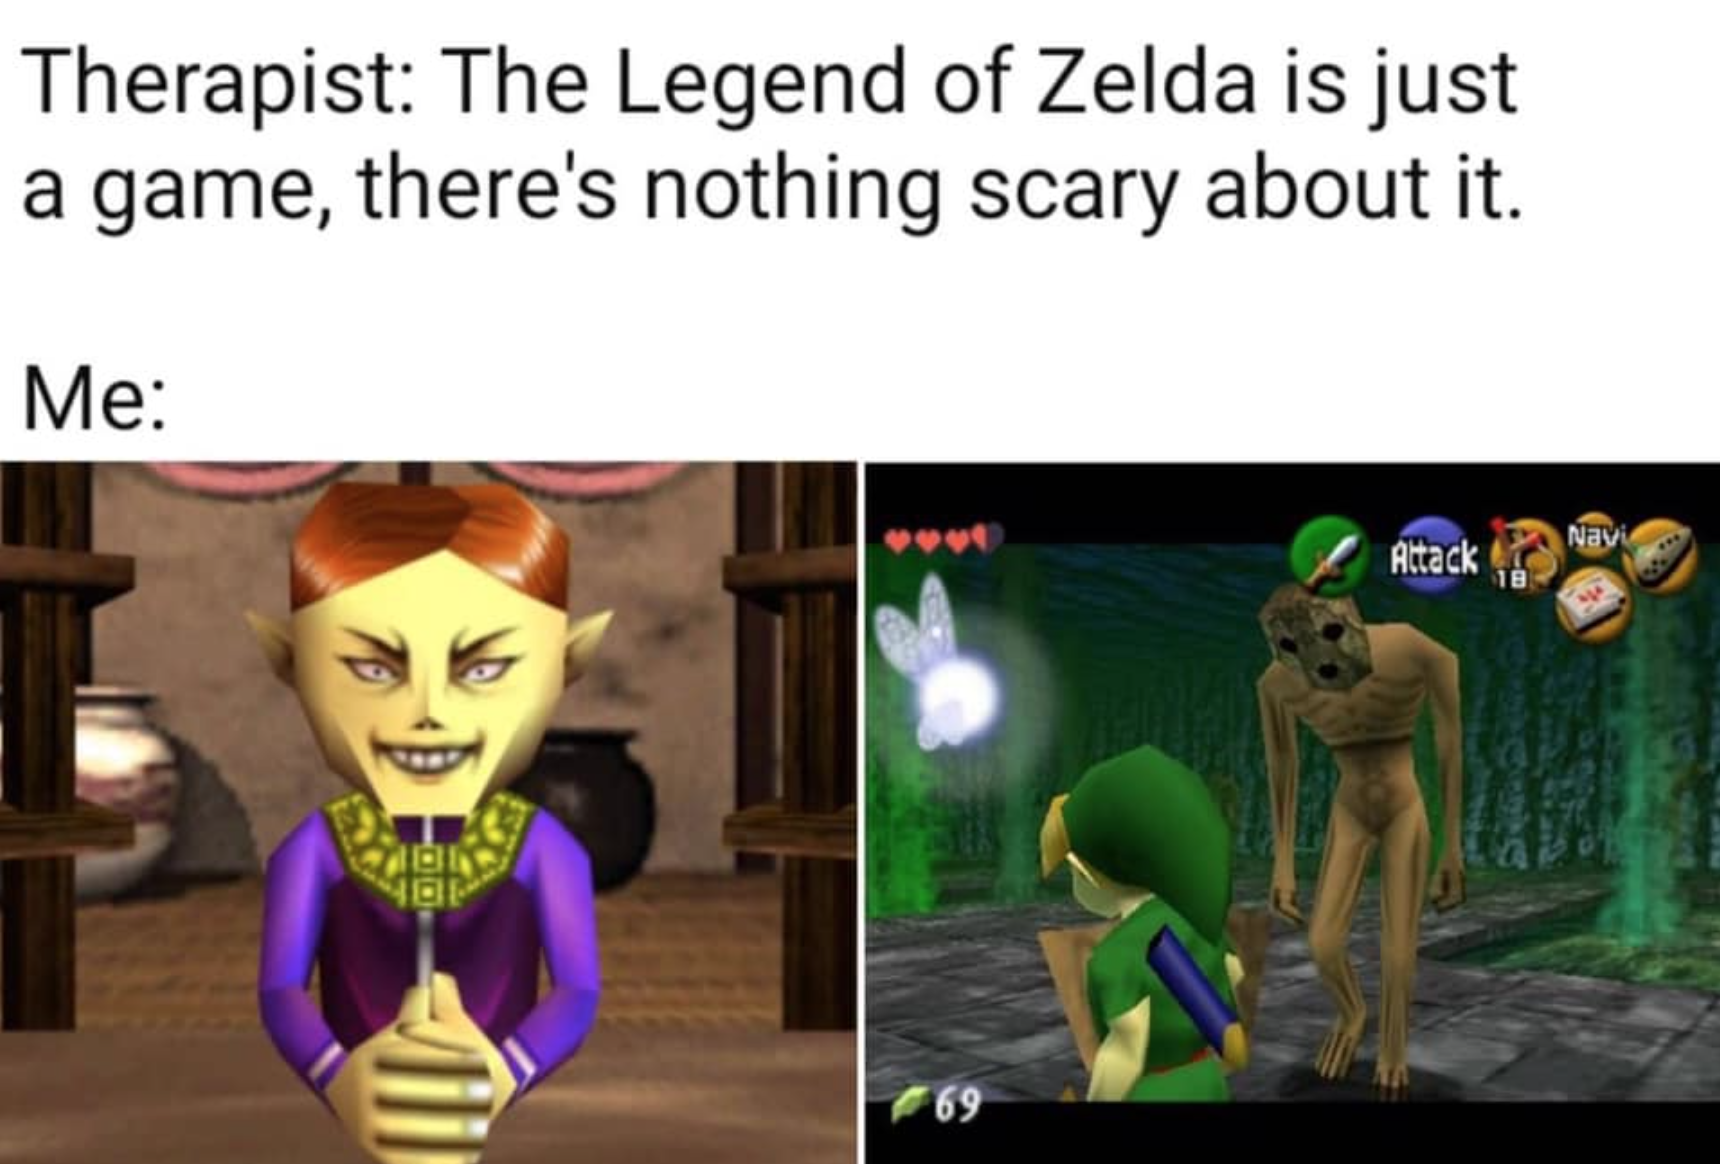 happy mask salesman angry - Therapist The Legend of Zelda is just a game, there's nothing scary about it. Me Navi Attack